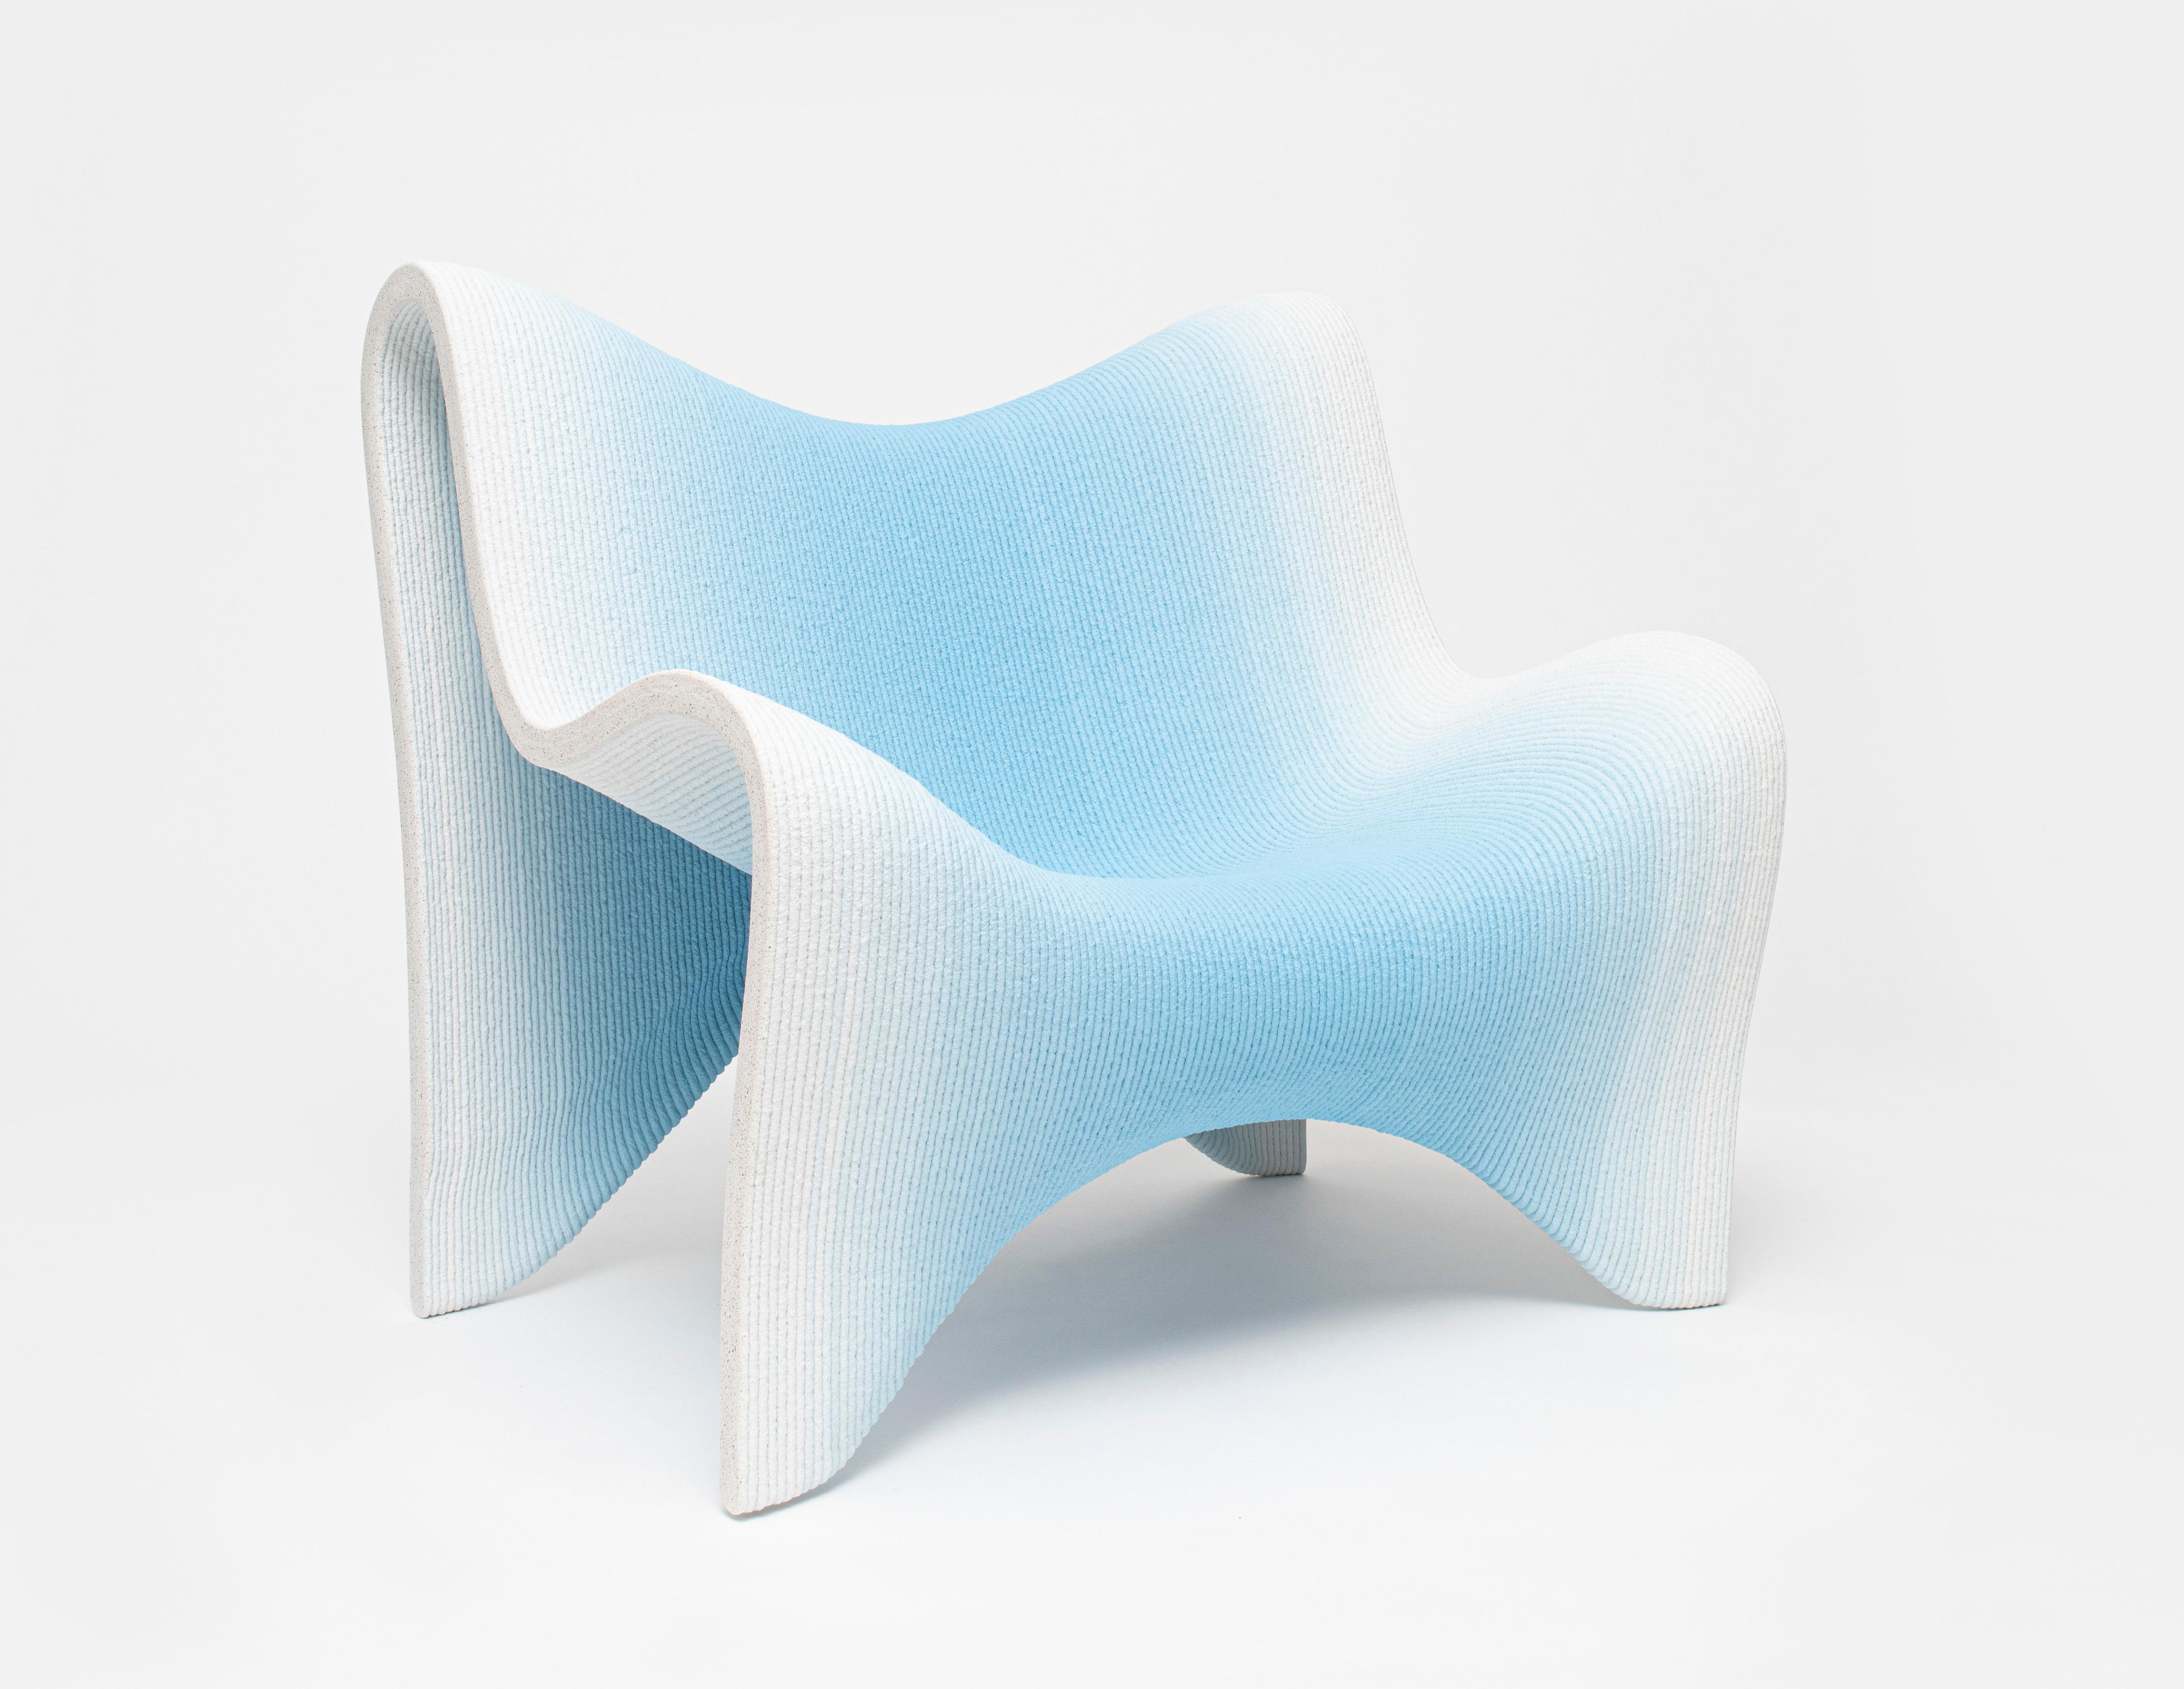 Gradient armchair by Philipp Aduatz
8 + 2 A/P
Dimensions: 108 x 95 x 102 cm
Materials: 3D printed concrete dyed, reinforced with steel

Available in red, blue, beige, green and black

The 3D printed gradient furniture collection is Philipp